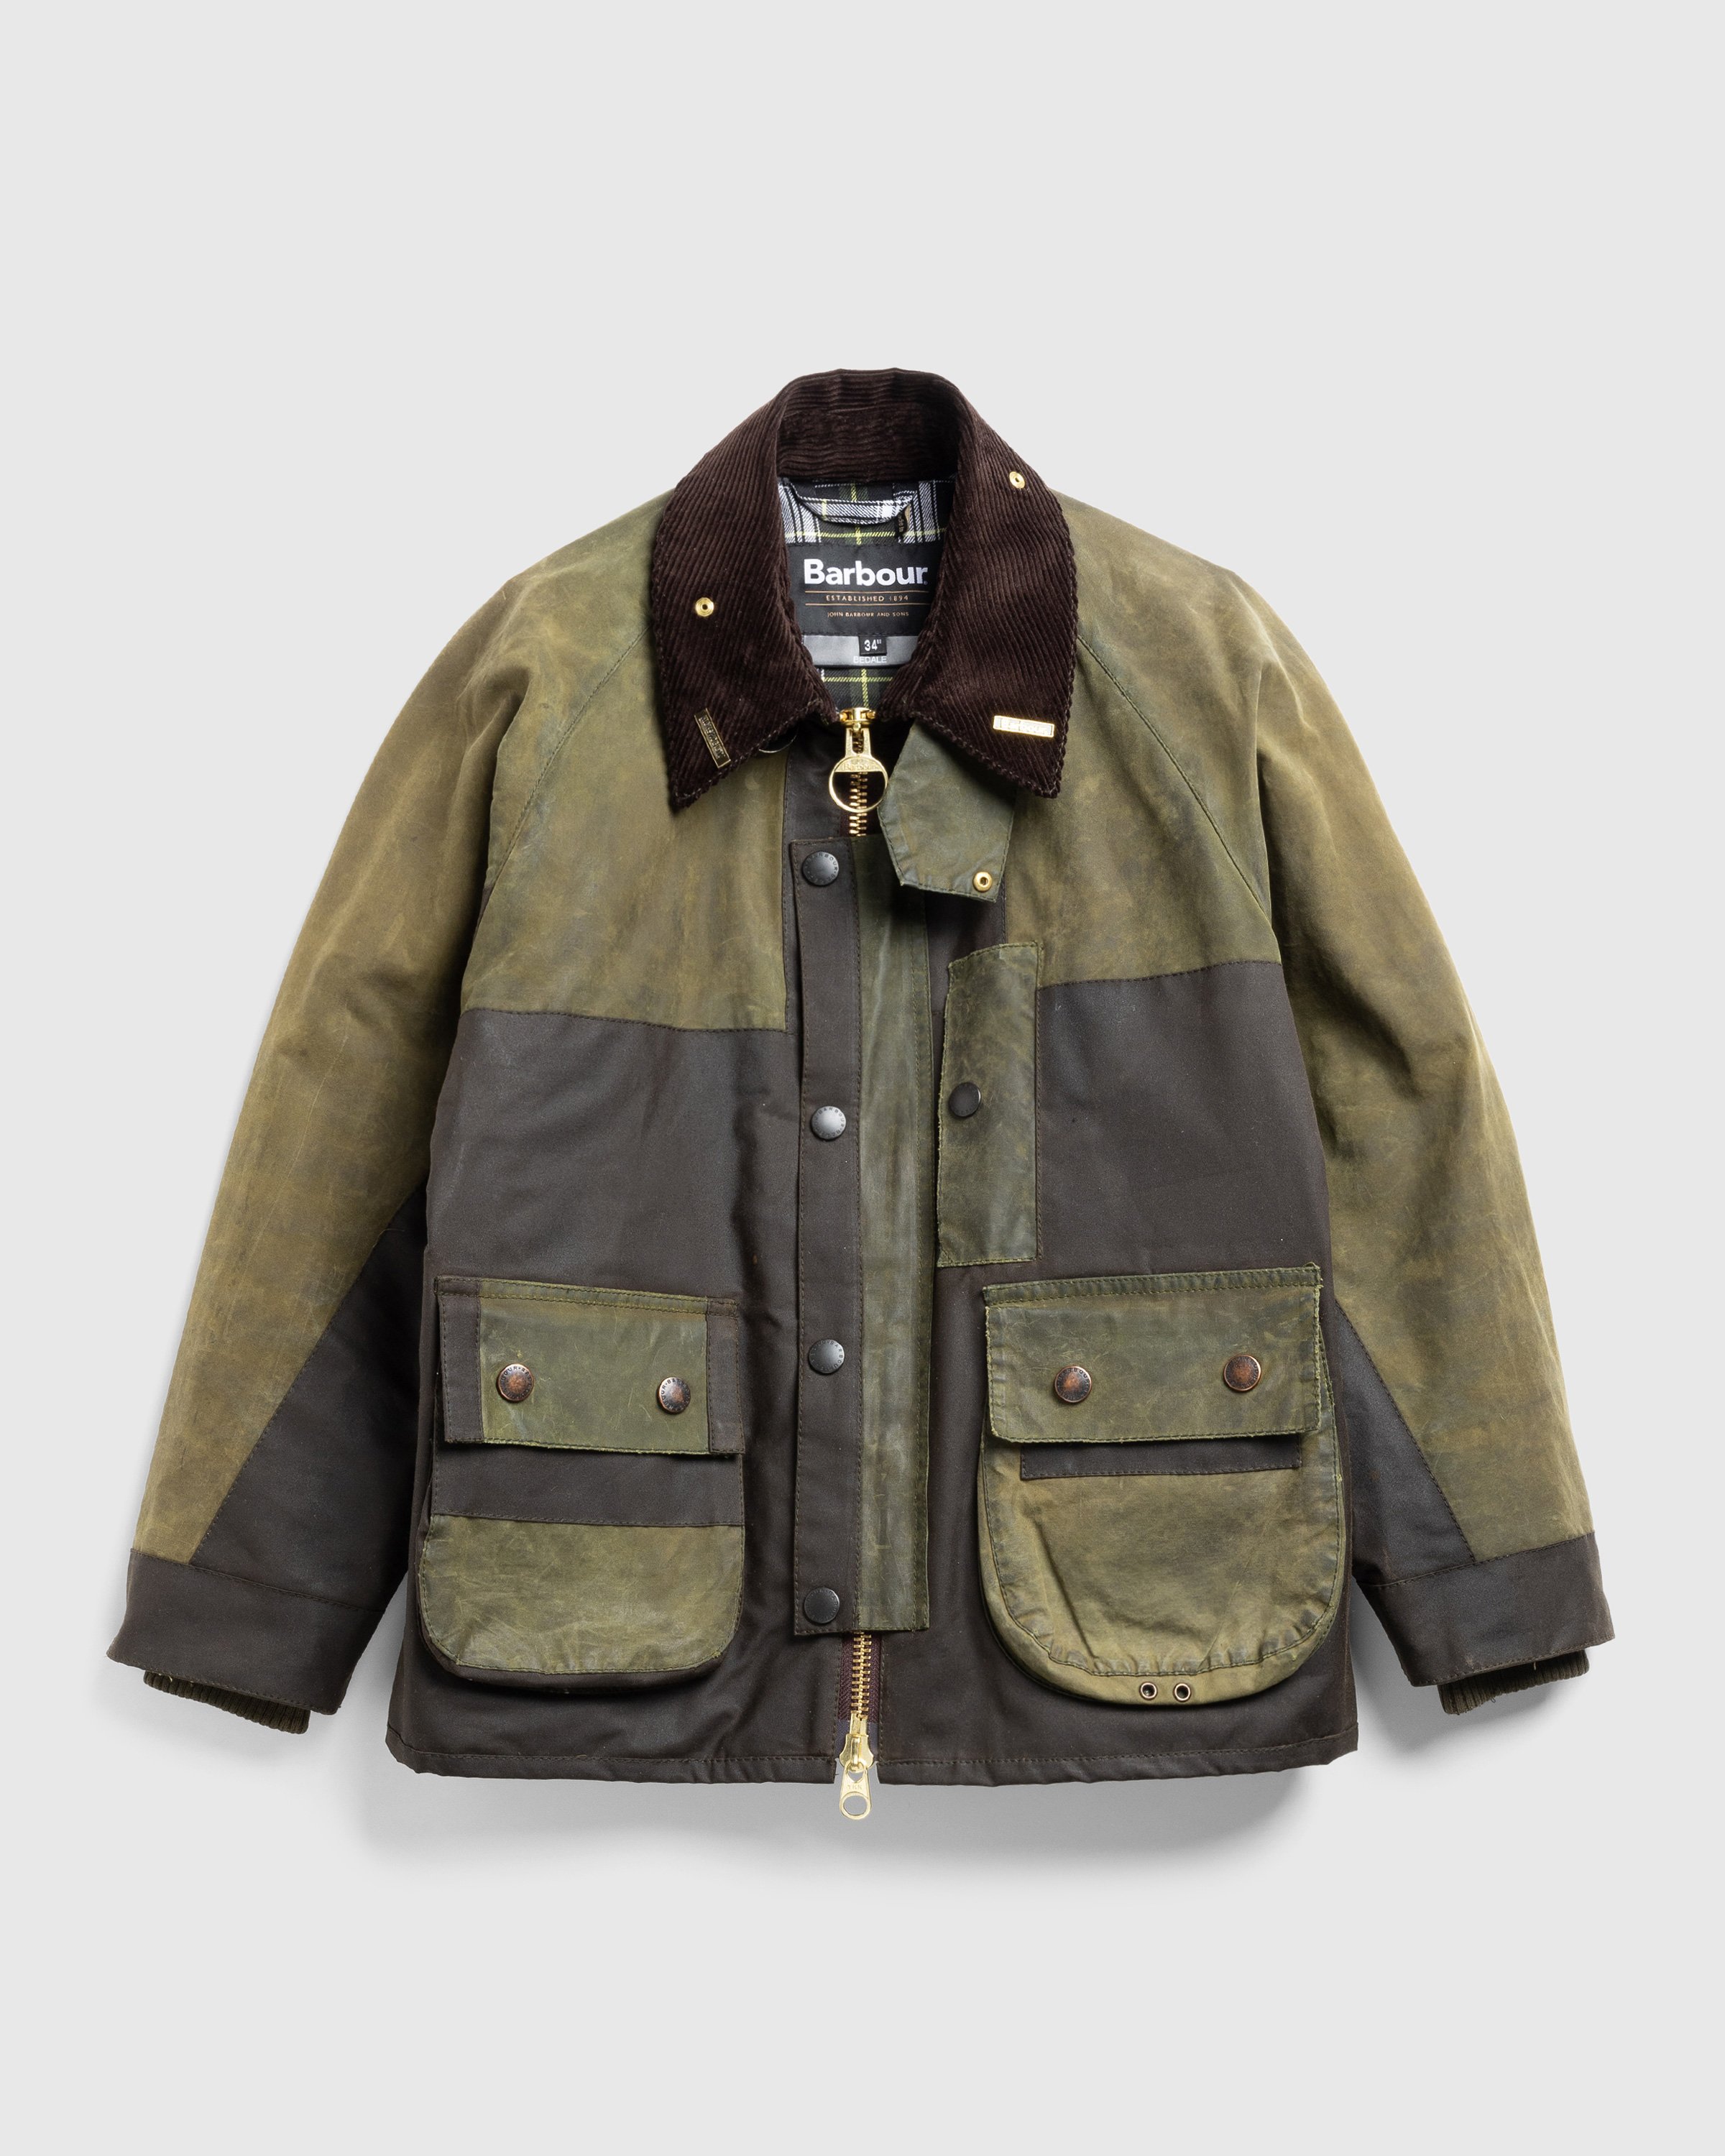 Barbour x Highsnobiety - Re-Loved Cropped Bedale Jacket 1 - 34 - Olive-Green - Clothing - Olive - Image 1